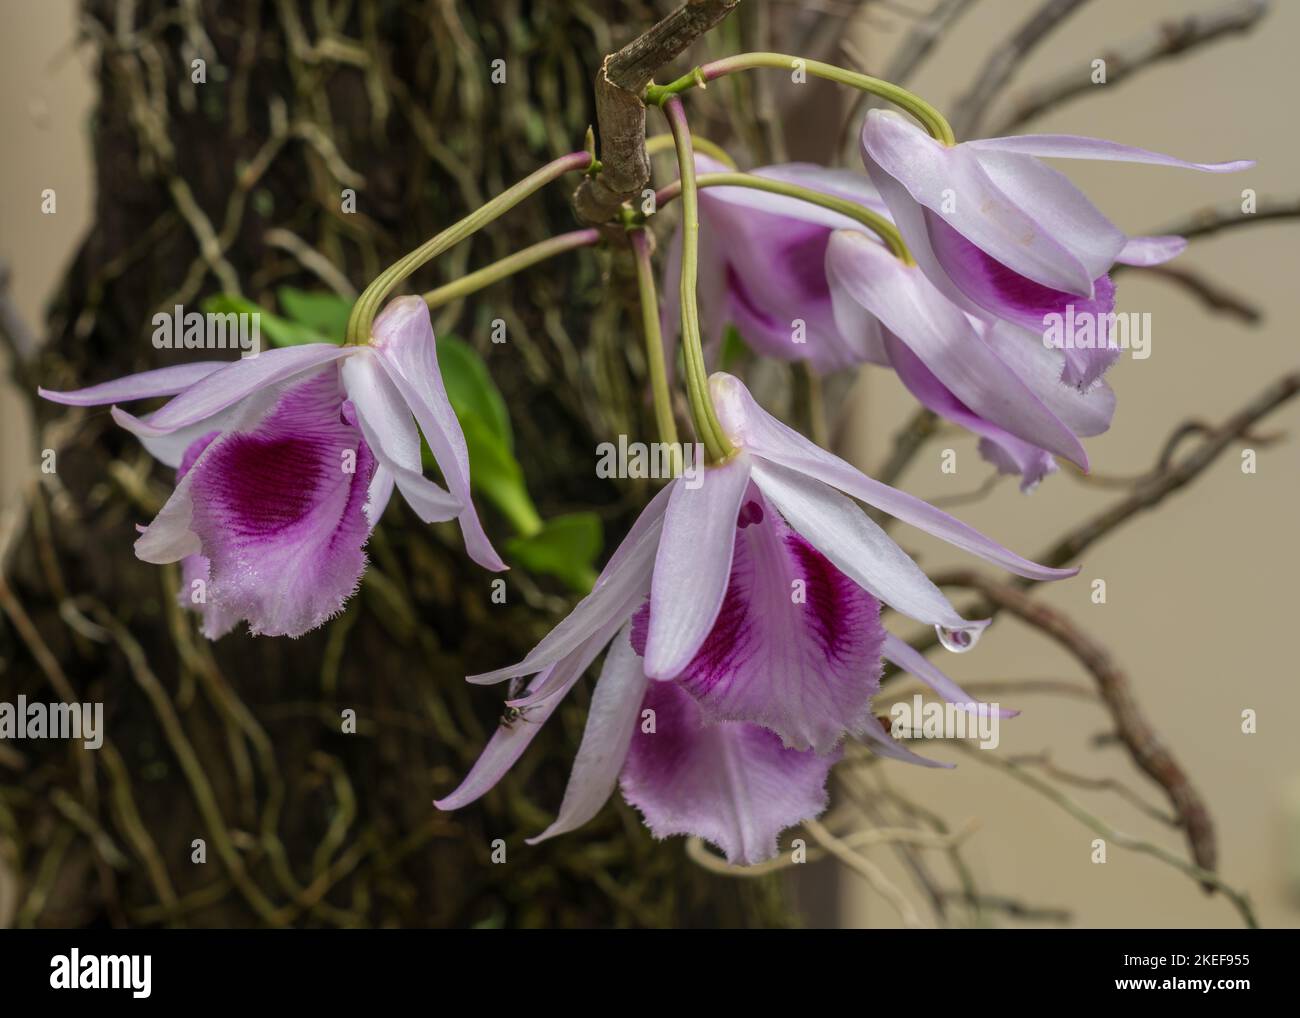 Closeup view of colorful white pink and purple dendrobium anosmum epiphytic orchid species flowers after rain Stock Photo